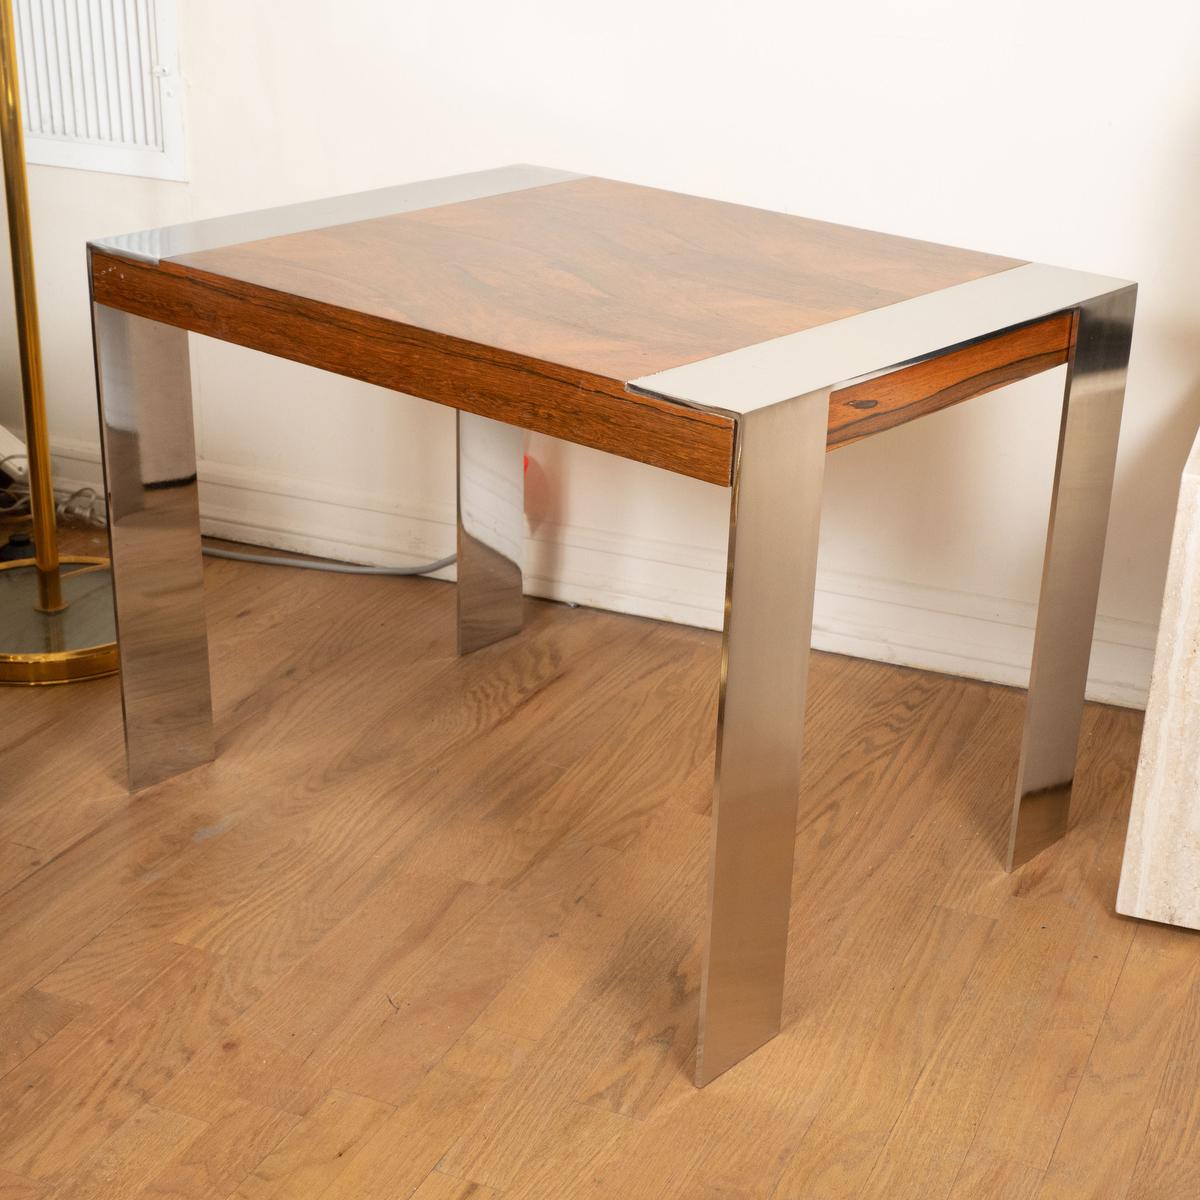 Wood side table with nickel details.